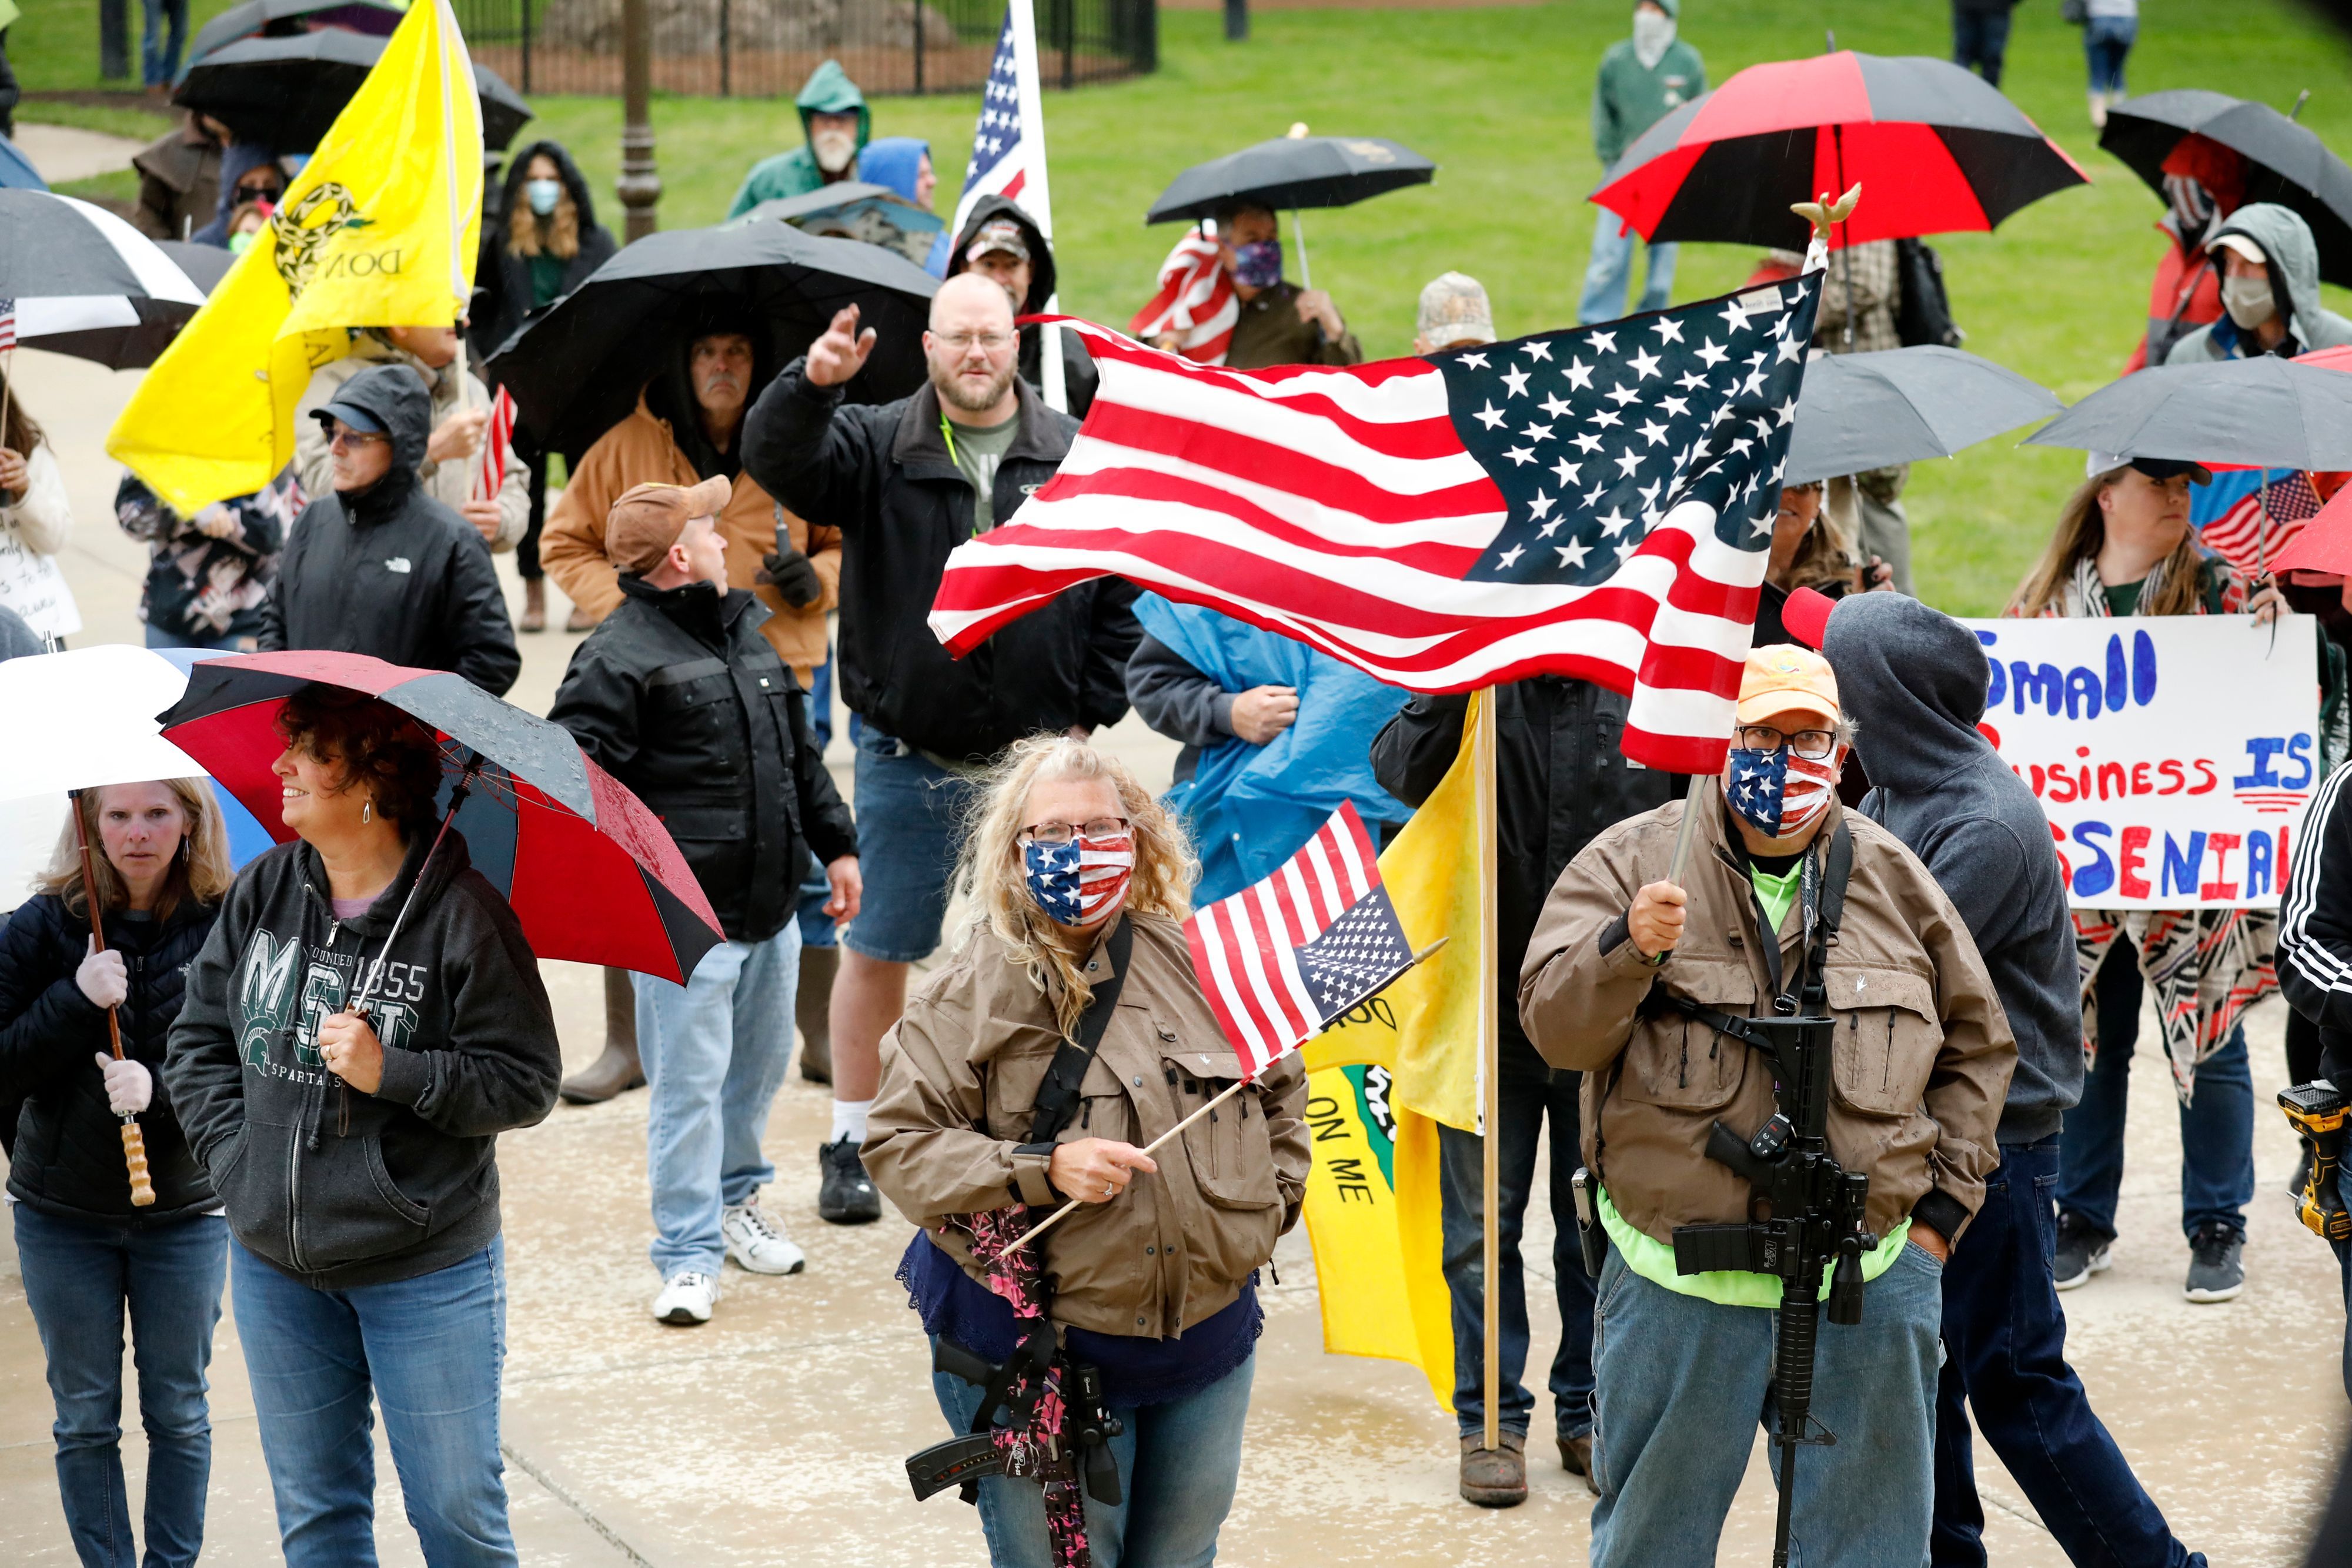 In this image, two people carry assault rifles and american flags with a crowd of people holding umbrellas standing behind them